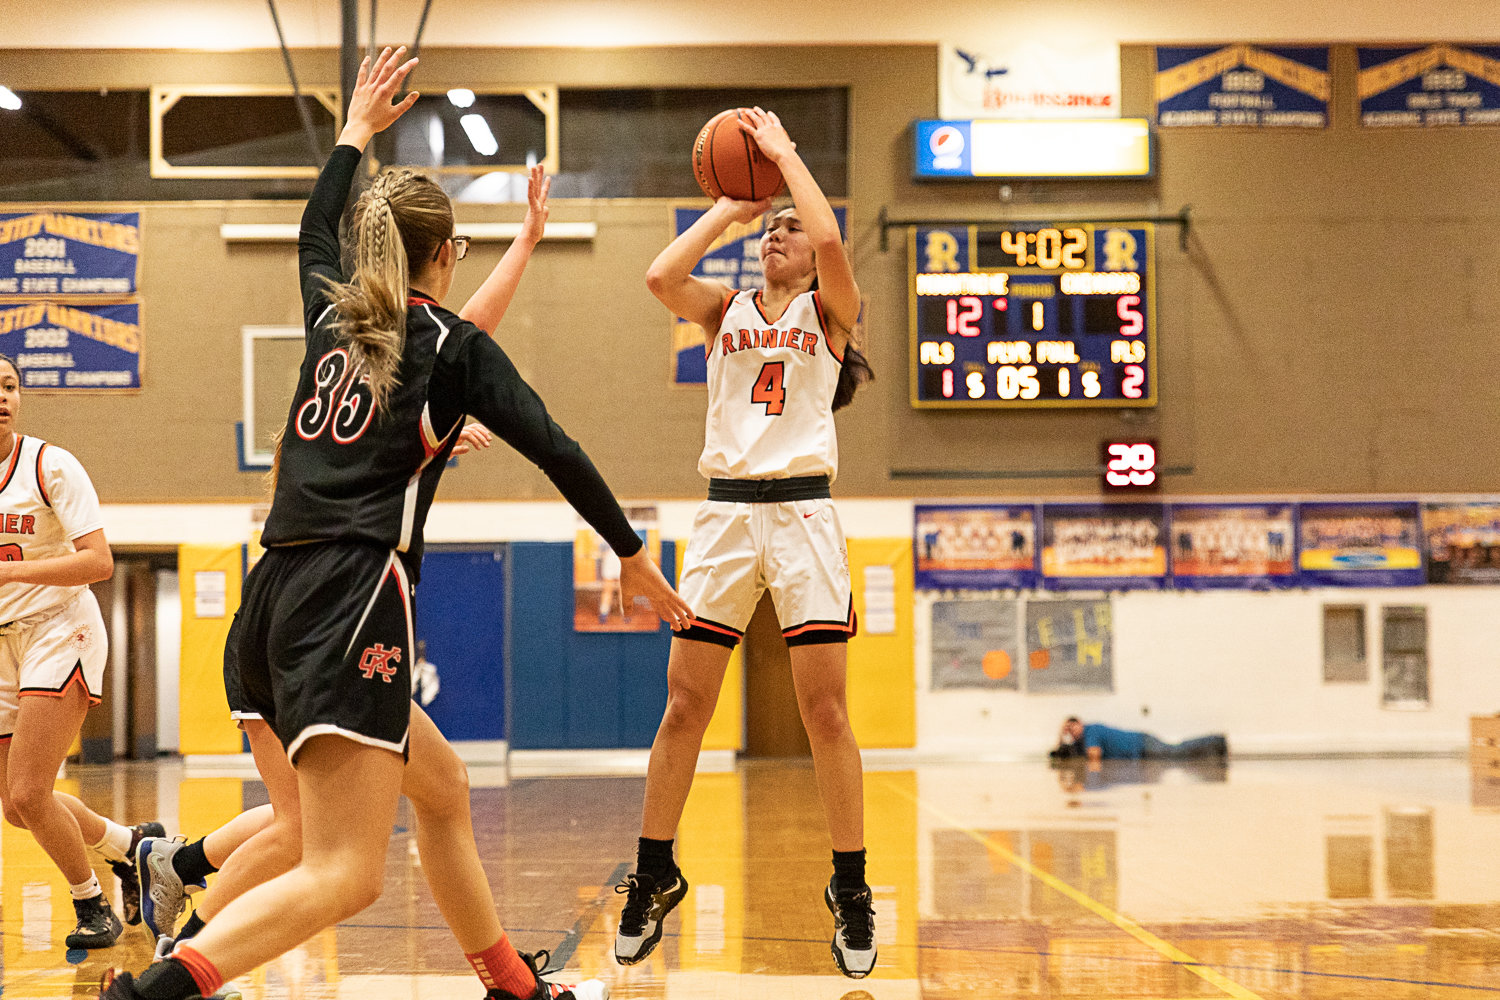 Rainier guard Angelica Askey fires up a shot against Kalama in the first round of the 2B District tournament Feb. 4 at Rochester.